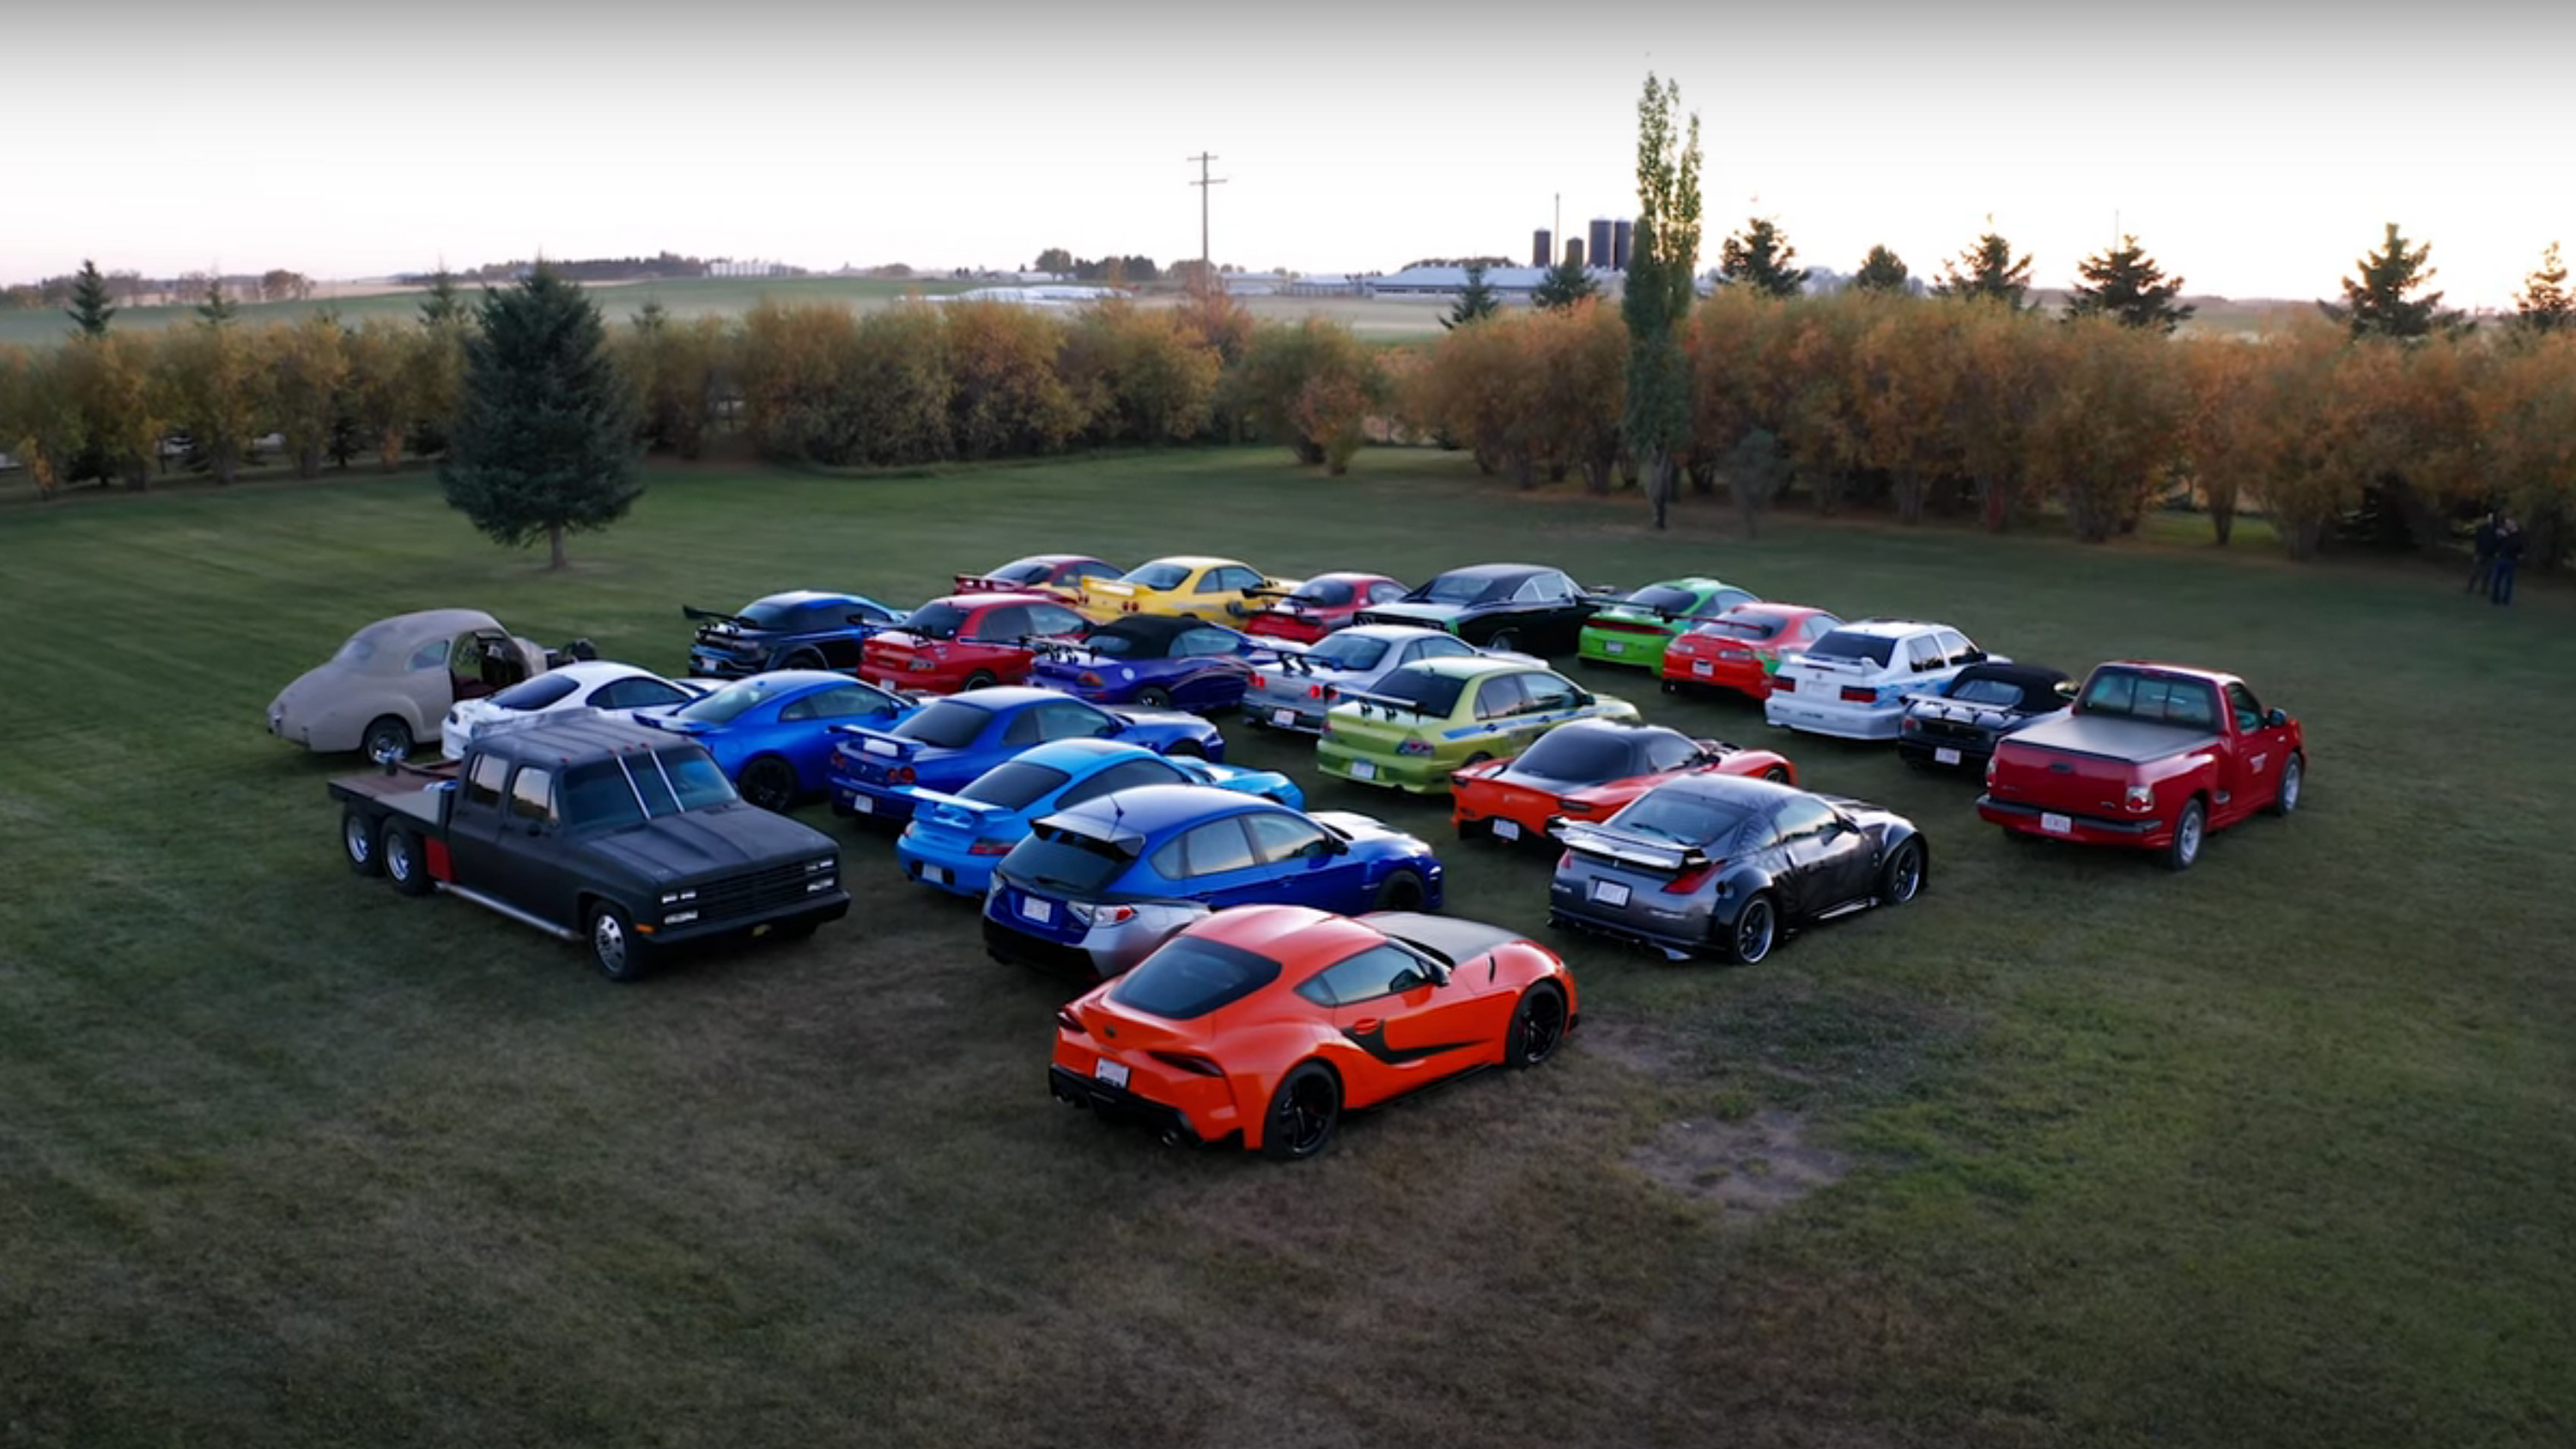 Flashback to the World's Largest Fast & Furious Collection